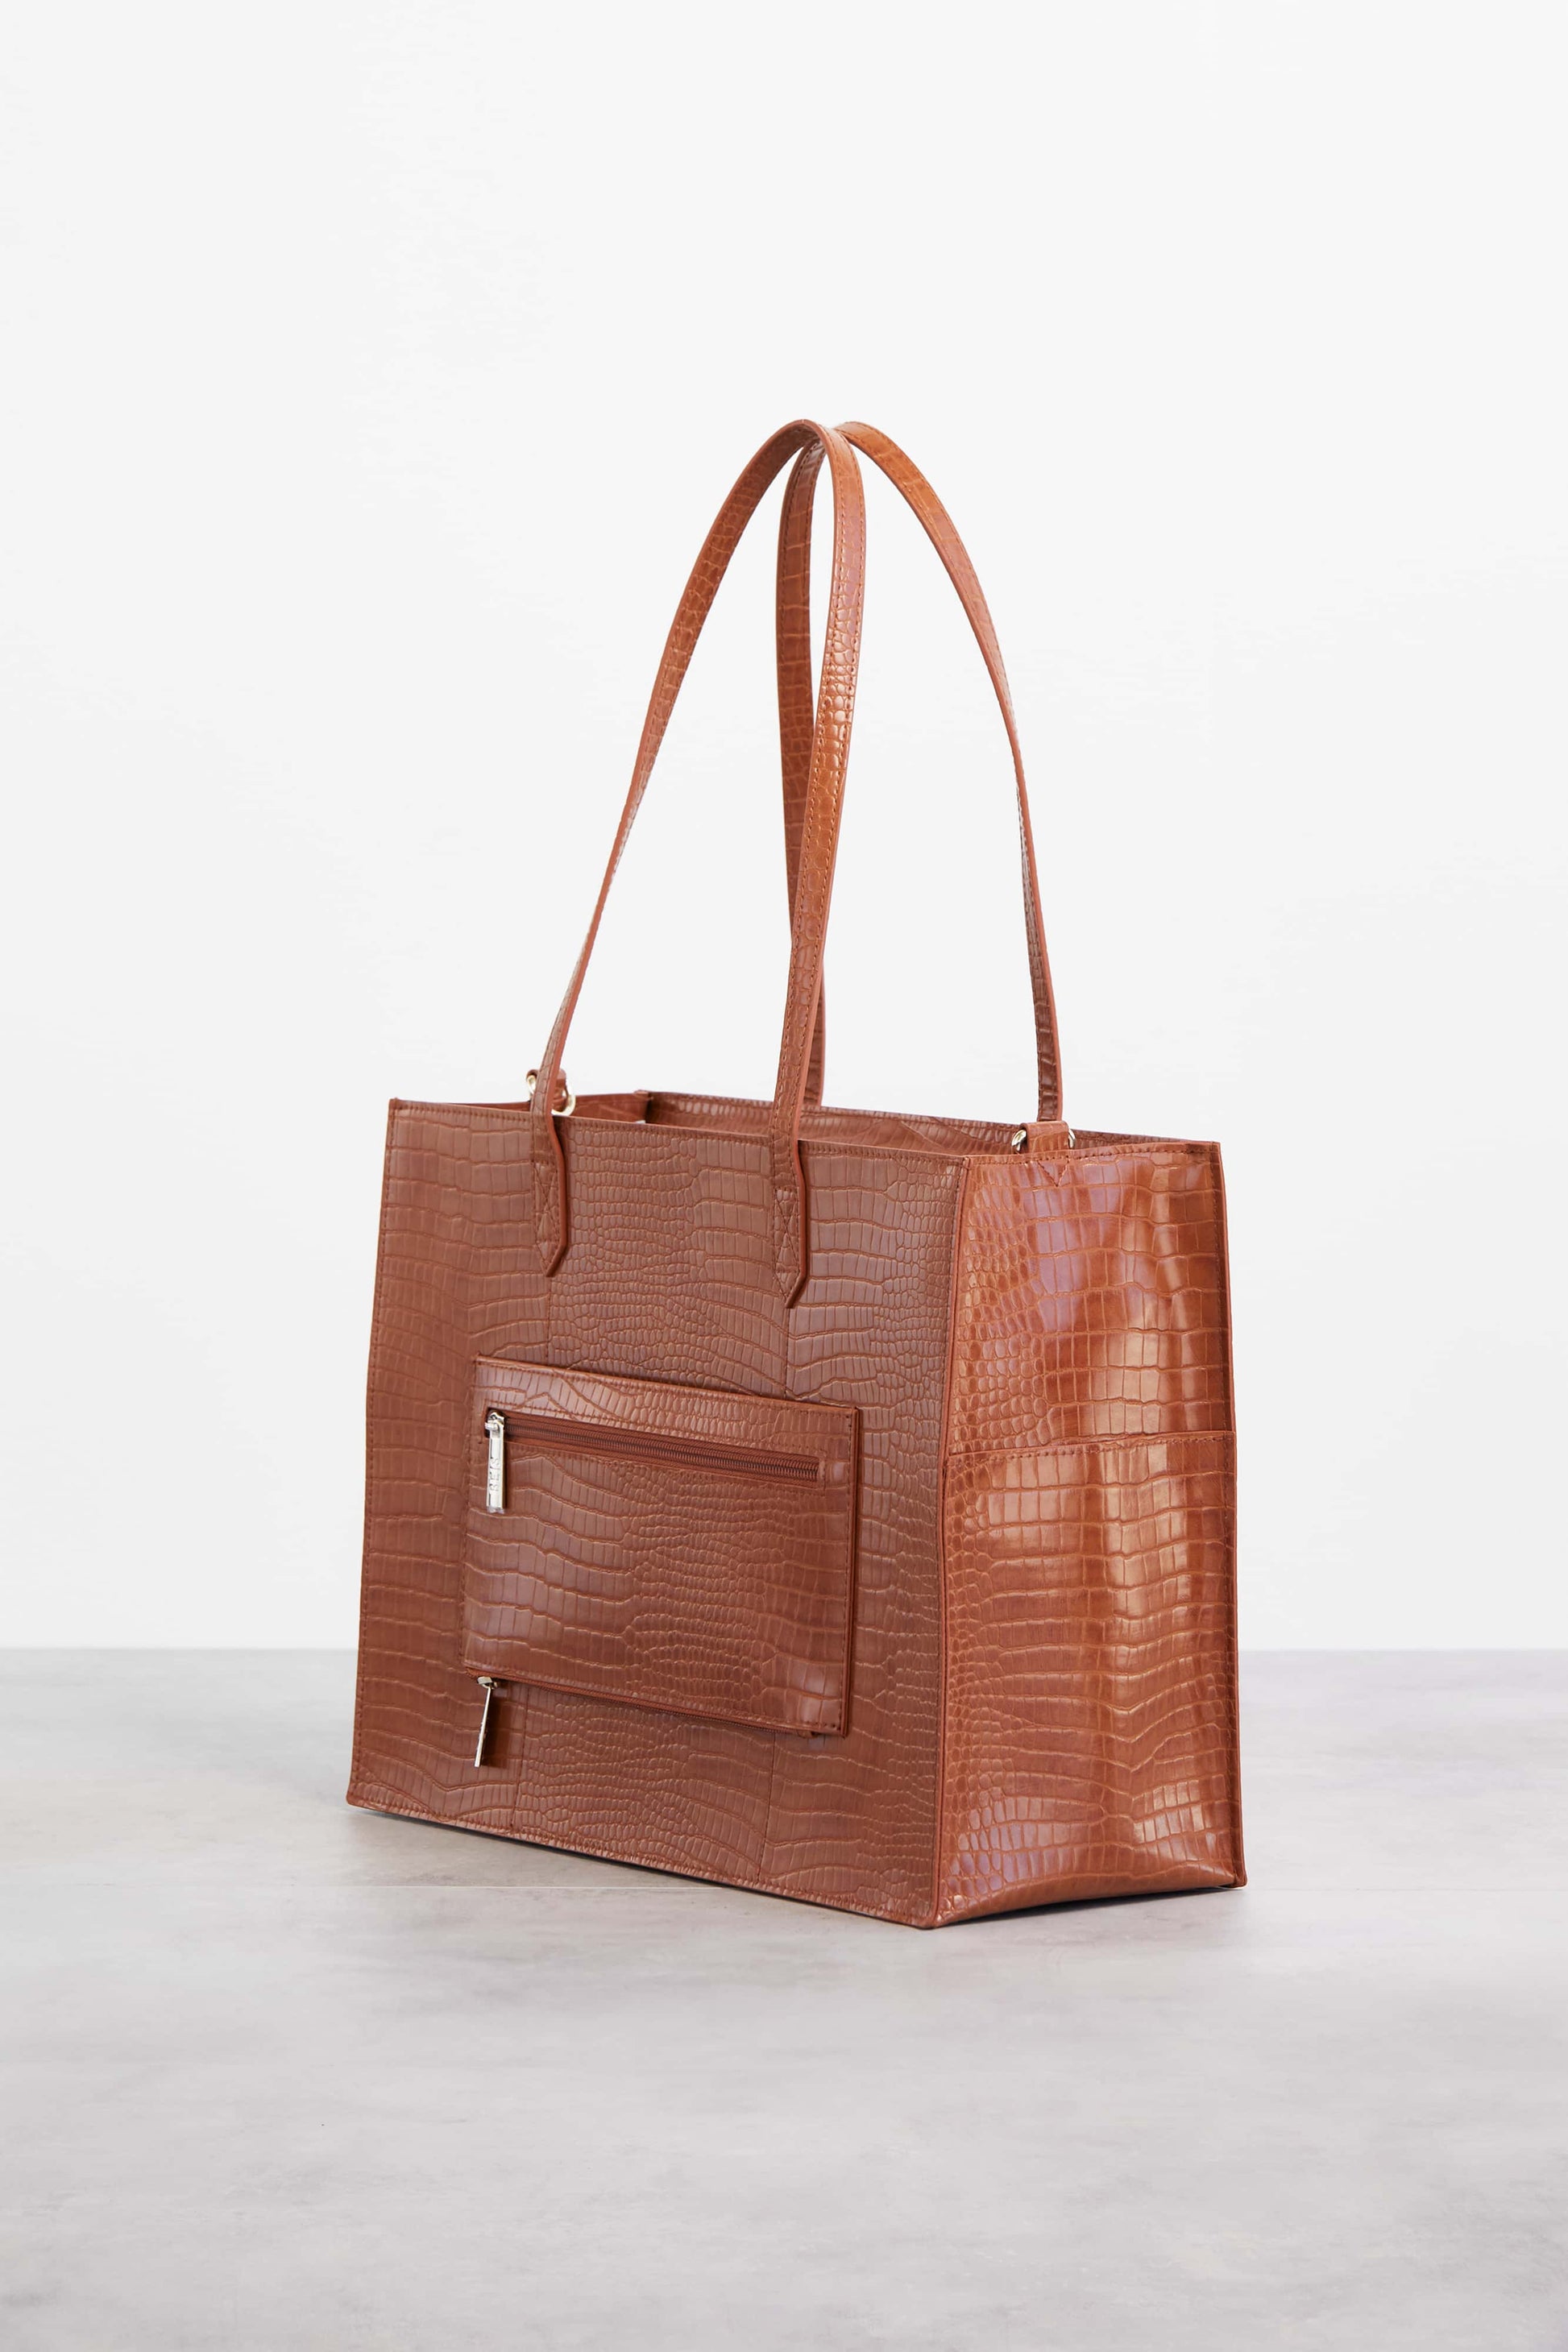 Mini Work Tote in Cognac Croc Back with Trolley Sleeve and Zipper